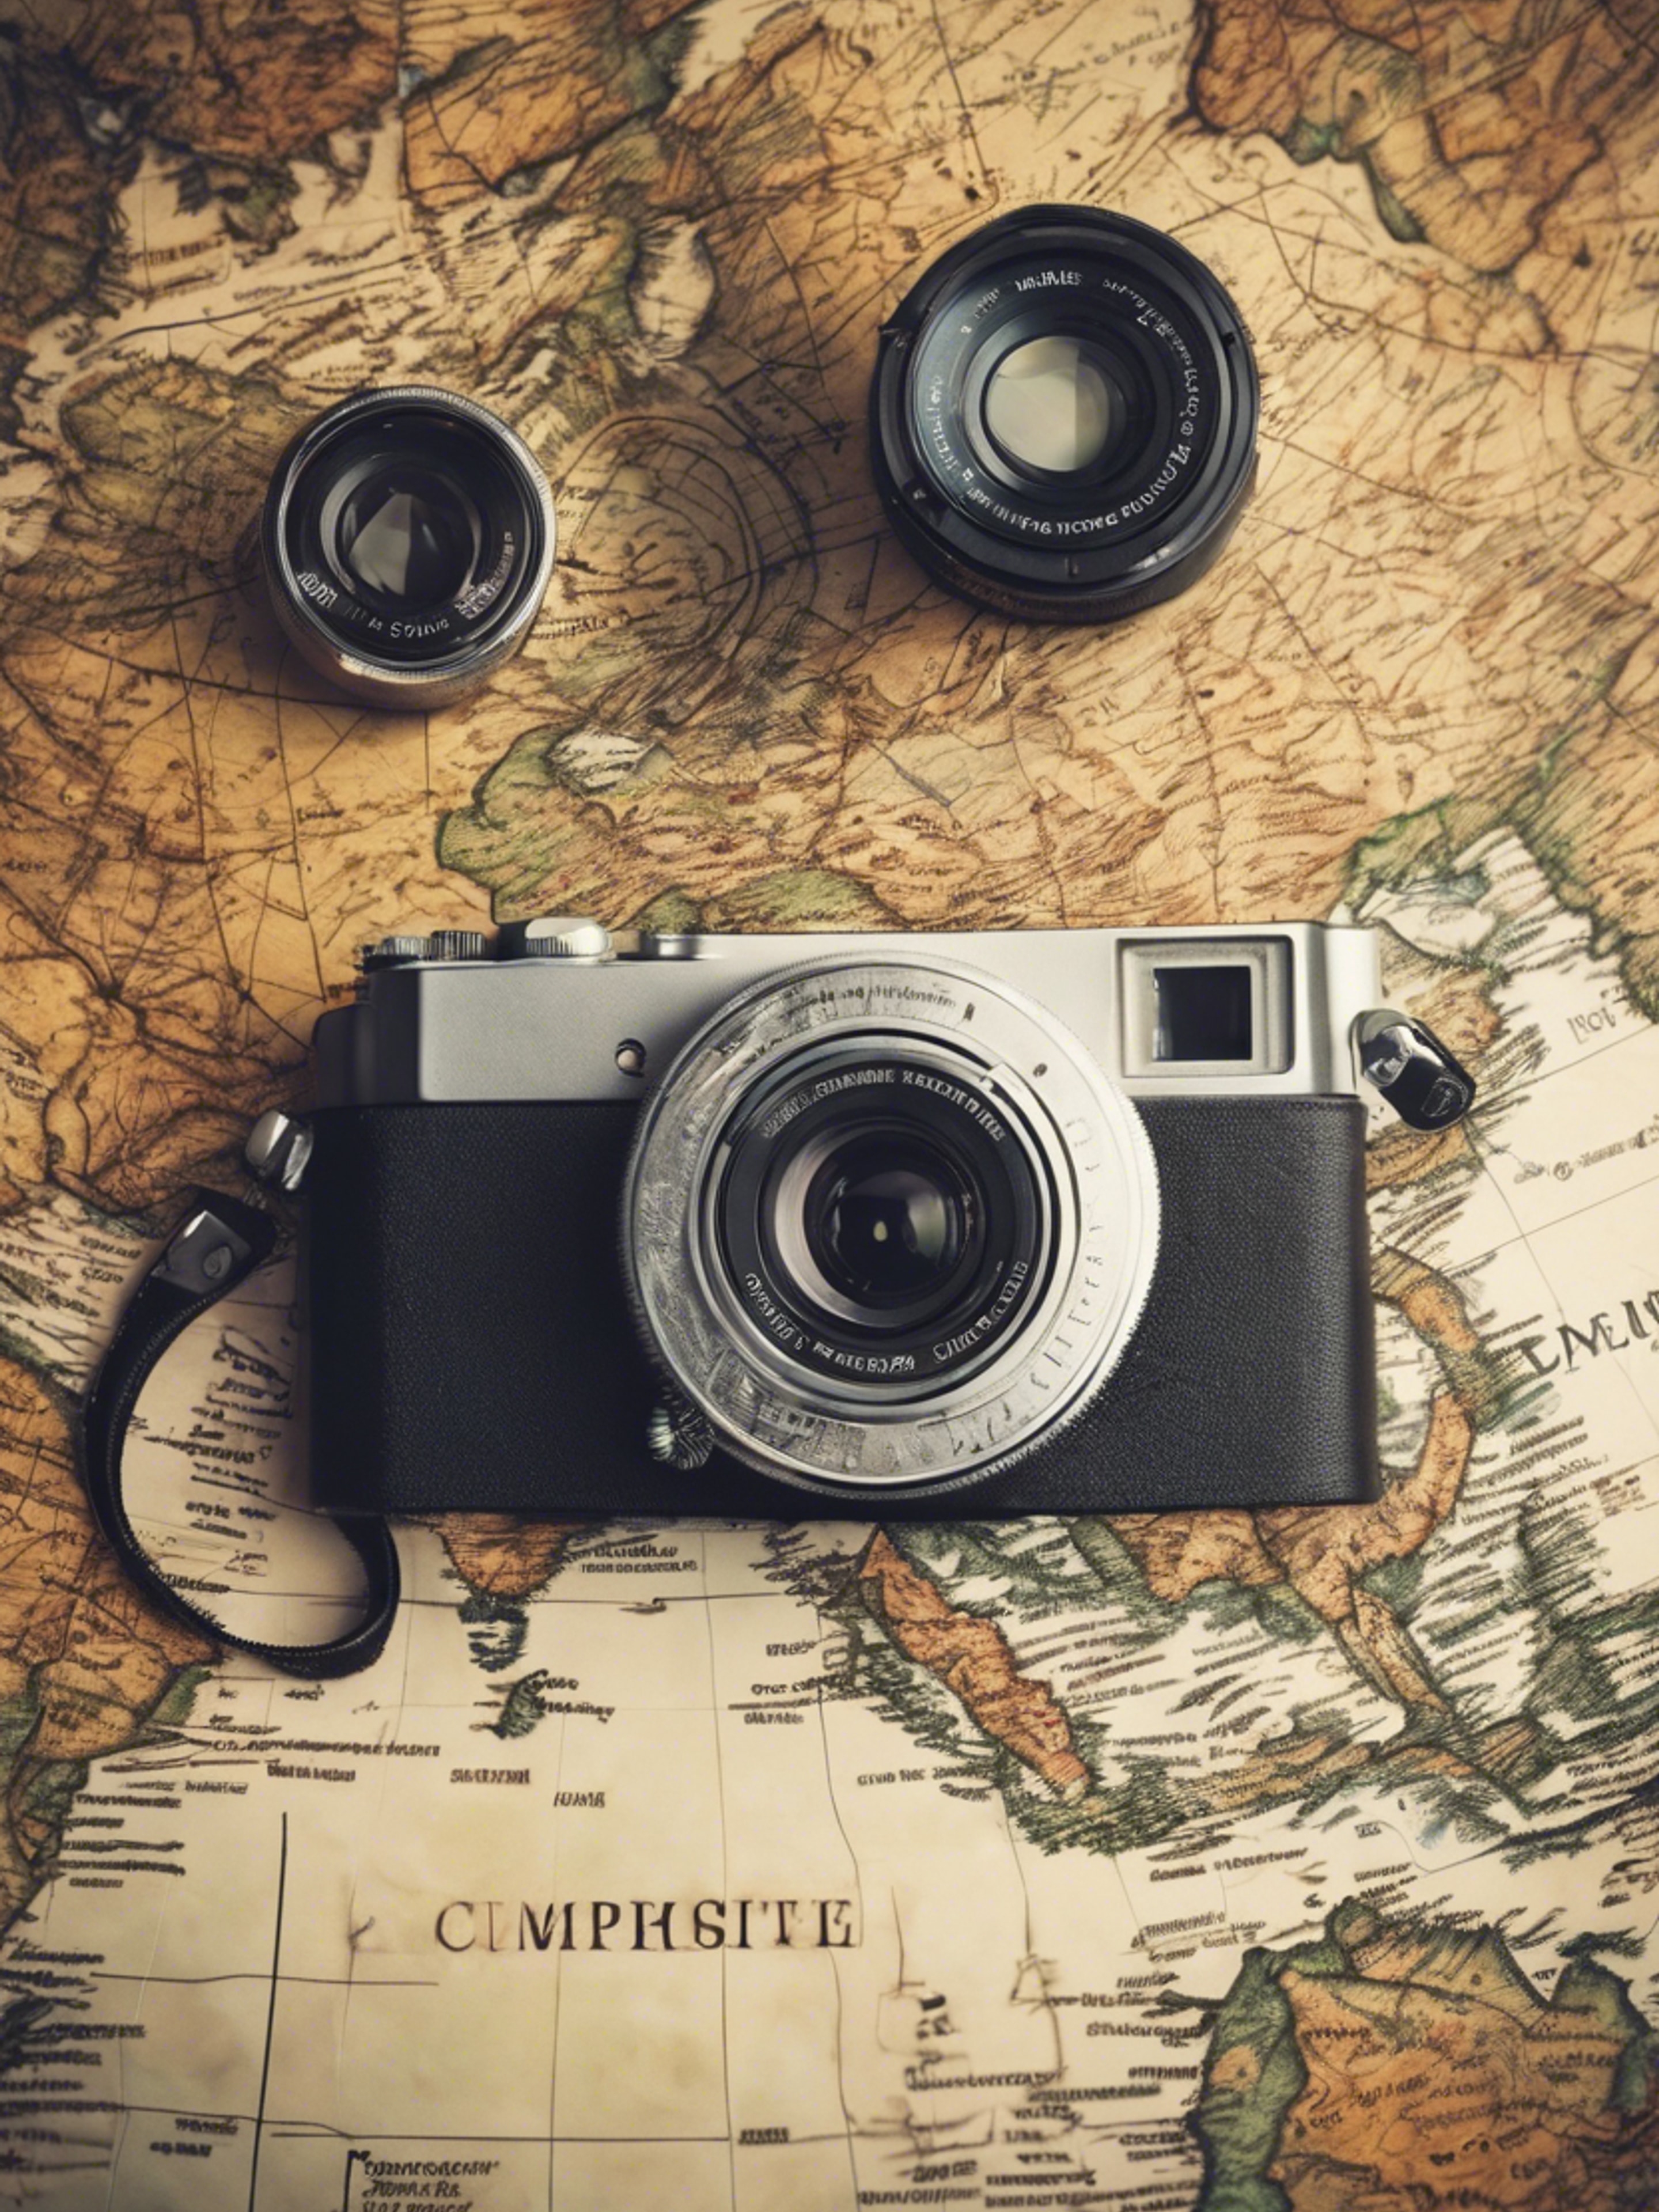 A compact camera with vintage design, placed on a world map to convey the spirit of travel. ផ្ទាំង​រូបភាព[89e32525bdc346769ef4]